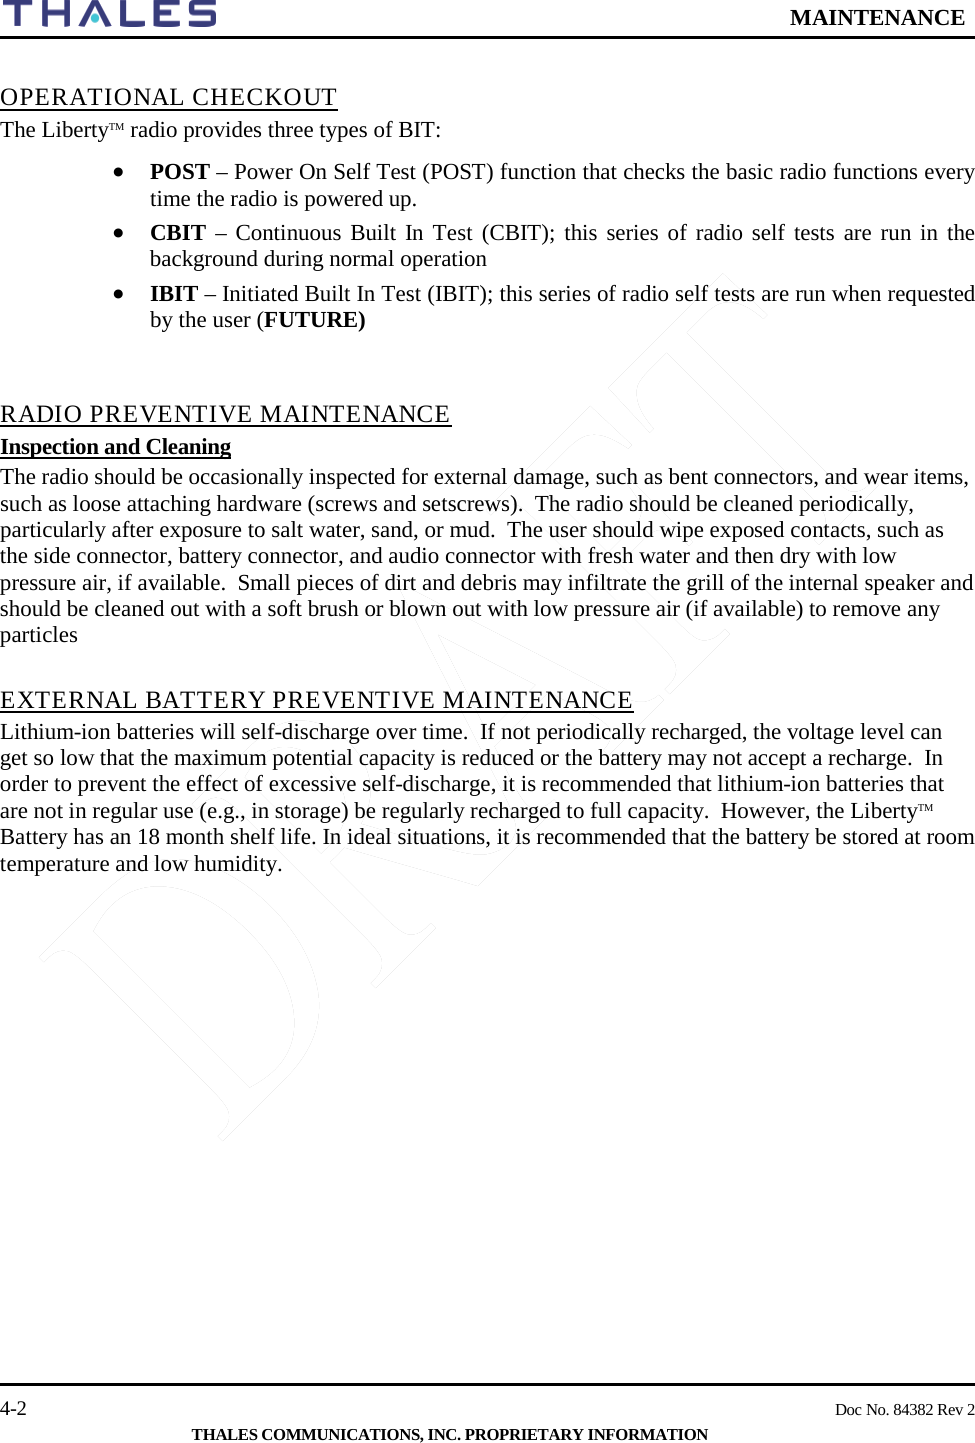  MAINTENANCE   4-2    Doc No. 84382 Rev 2  THALES COMMUNICATIONS, INC. PROPRIETARY INFORMATION  OPERATIONAL CHECKOUT The LibertyTM radio provides three types of BIT: • POST – Power On Self Test (POST) function that checks the basic radio functions every time the radio is powered up.  • CBIT – Continuous Built In Test (CBIT); this series of radio self tests are run in the background during normal operation • IBIT – Initiated Built In Test (IBIT); this series of radio self tests are run when requested by the user (FUTURE)   RADIO PREVENTIVE MAINTENANCE Inspection and Cleaning The radio should be occasionally inspected for external damage, such as bent connectors, and wear items, such as loose attaching hardware (screws and setscrews).  The radio should be cleaned periodically, particularly after exposure to salt water, sand, or mud.  The user should wipe exposed contacts, such as the side connector, battery connector, and audio connector with fresh water and then dry with low pressure air, if available.  Small pieces of dirt and debris may infiltrate the grill of the internal speaker and should be cleaned out with a soft brush or blown out with low pressure air (if available) to remove any particles   EXTERNAL BATTERY PREVENTIVE MAINTENANCE Lithium-ion batteries will self-discharge over time.  If not periodically recharged, the voltage level can get so low that the maximum potential capacity is reduced or the battery may not accept a recharge.  In order to prevent the effect of excessive self-discharge, it is recommended that lithium-ion batteries that are not in regular use (e.g., in storage) be regularly recharged to full capacity.  However, the LibertyTM Battery has an 18 month shelf life. In ideal situations, it is recommended that the battery be stored at room temperature and low humidity.    